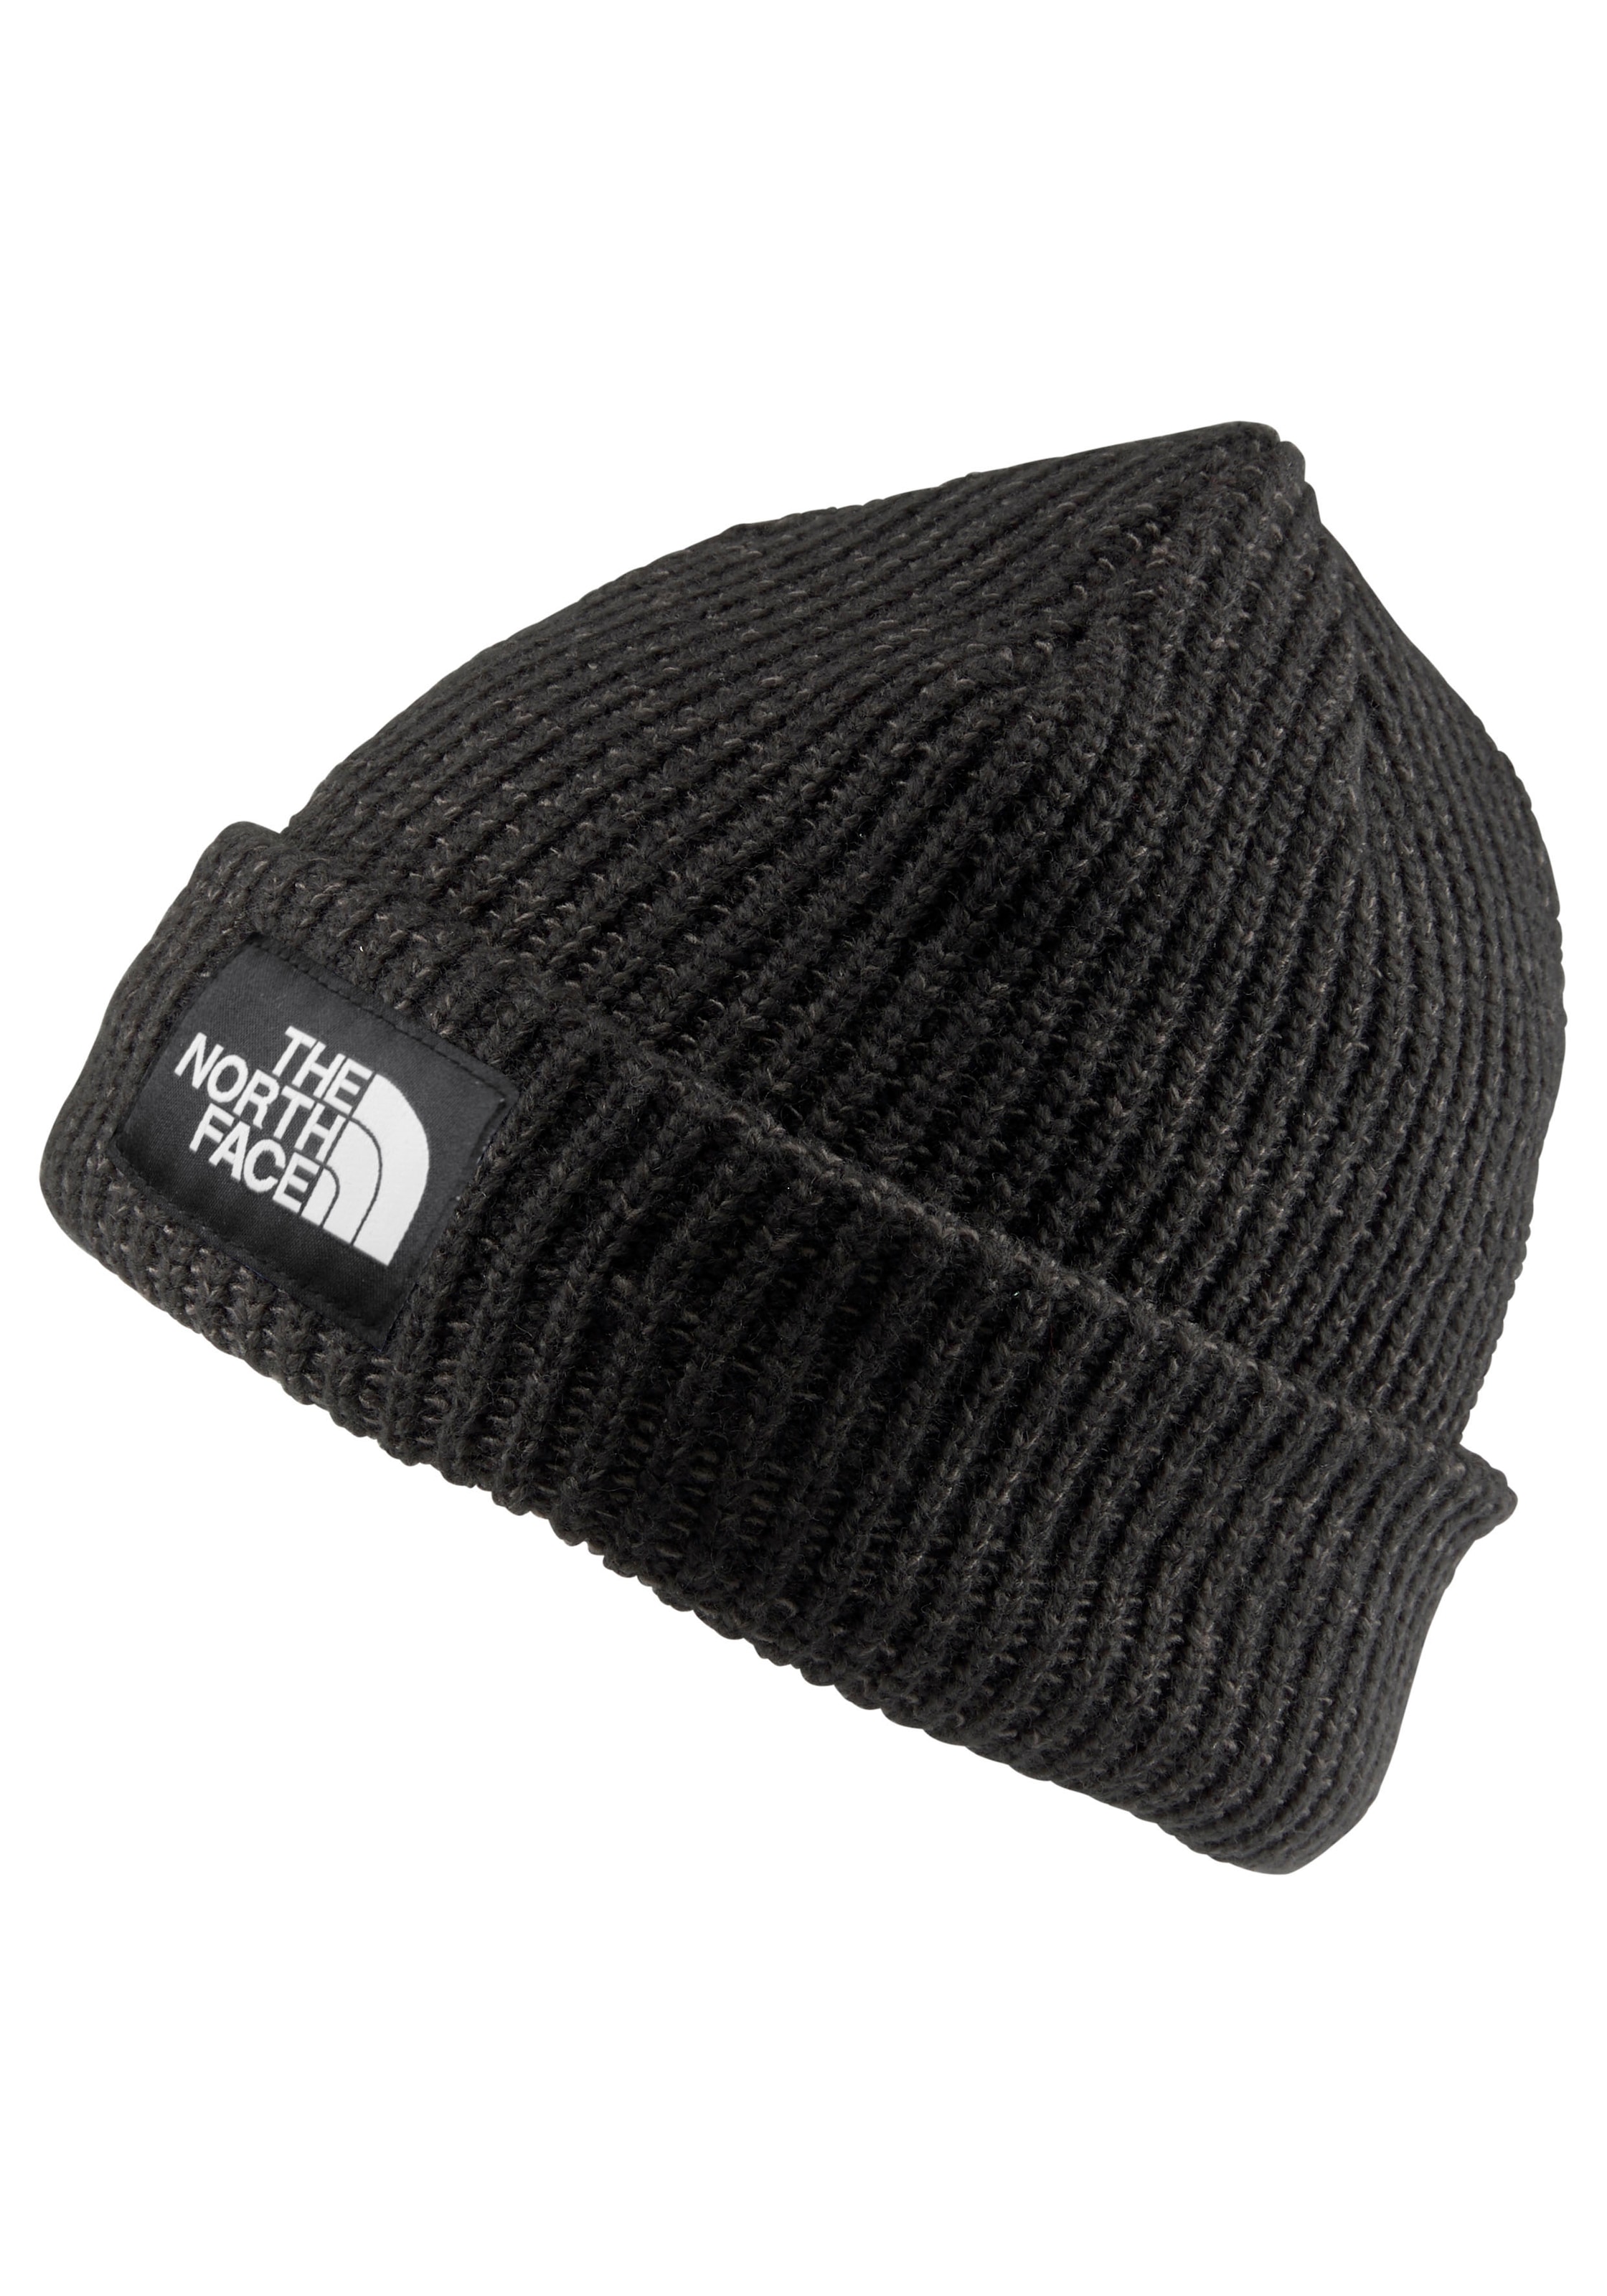 The North Face Strickmütze »SALTY LINED BEANIE«